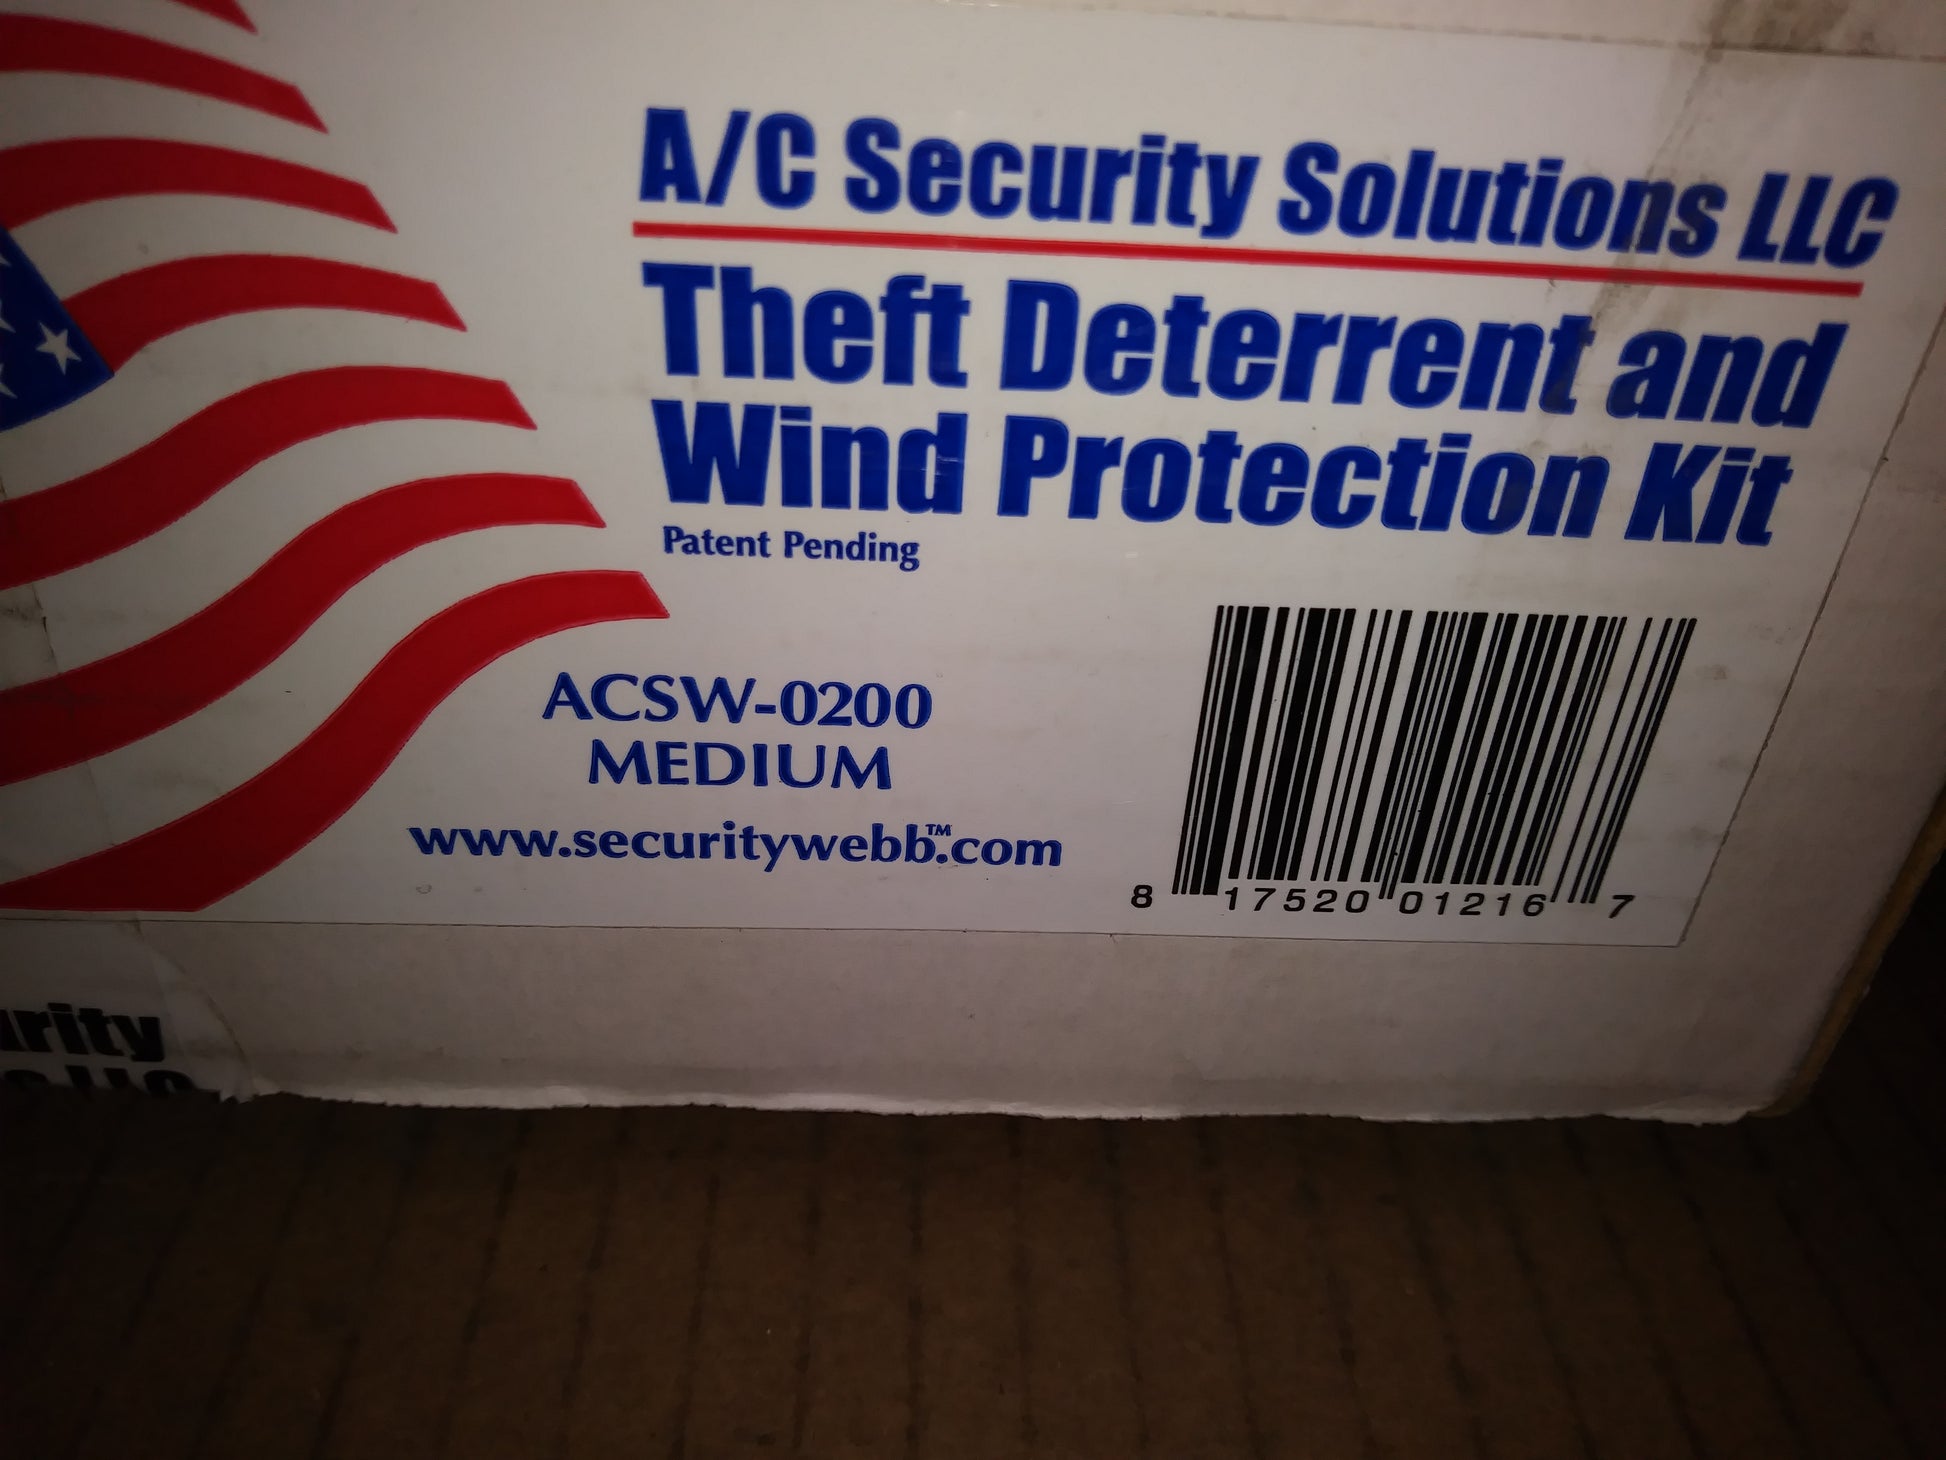 THEFT DETERRENT AND WIND PROTECTION KIT